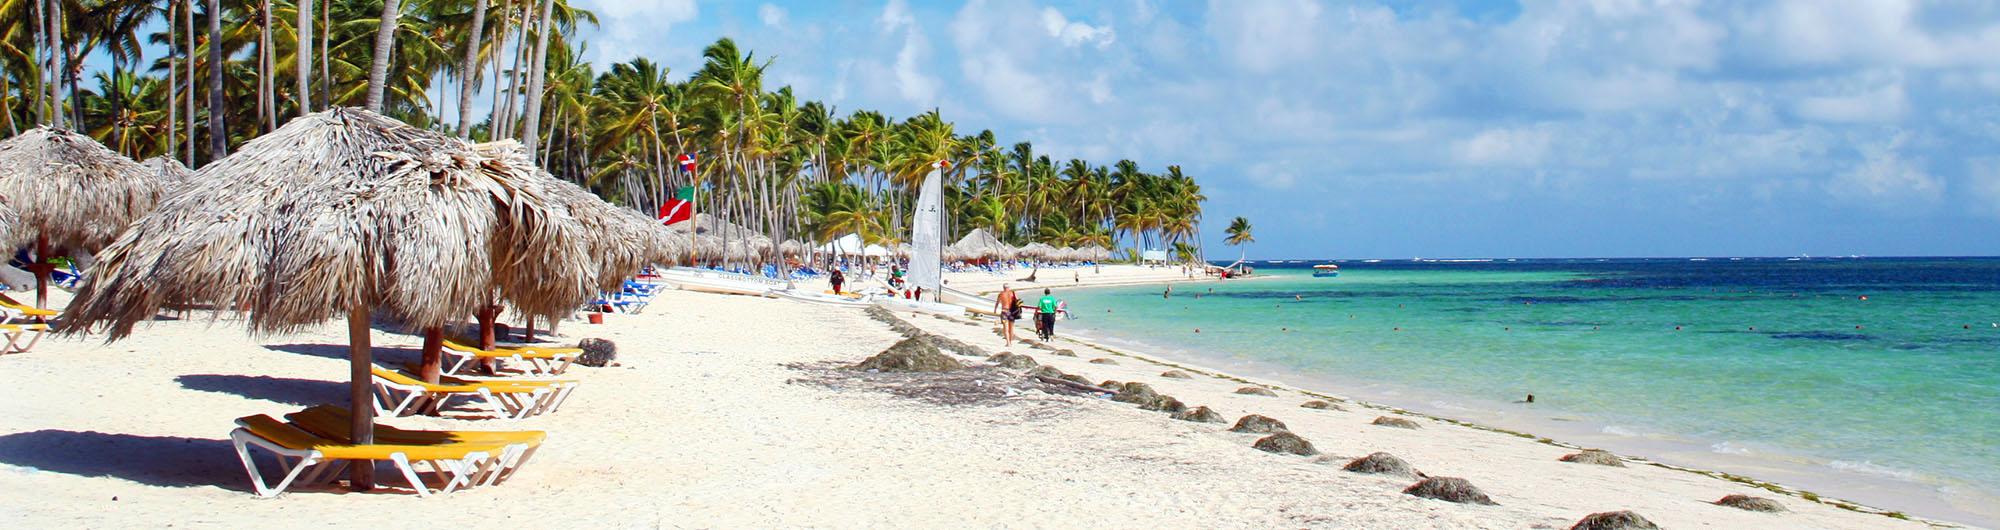 Search and compare cheap flights from Palm Springs to Punta Cana